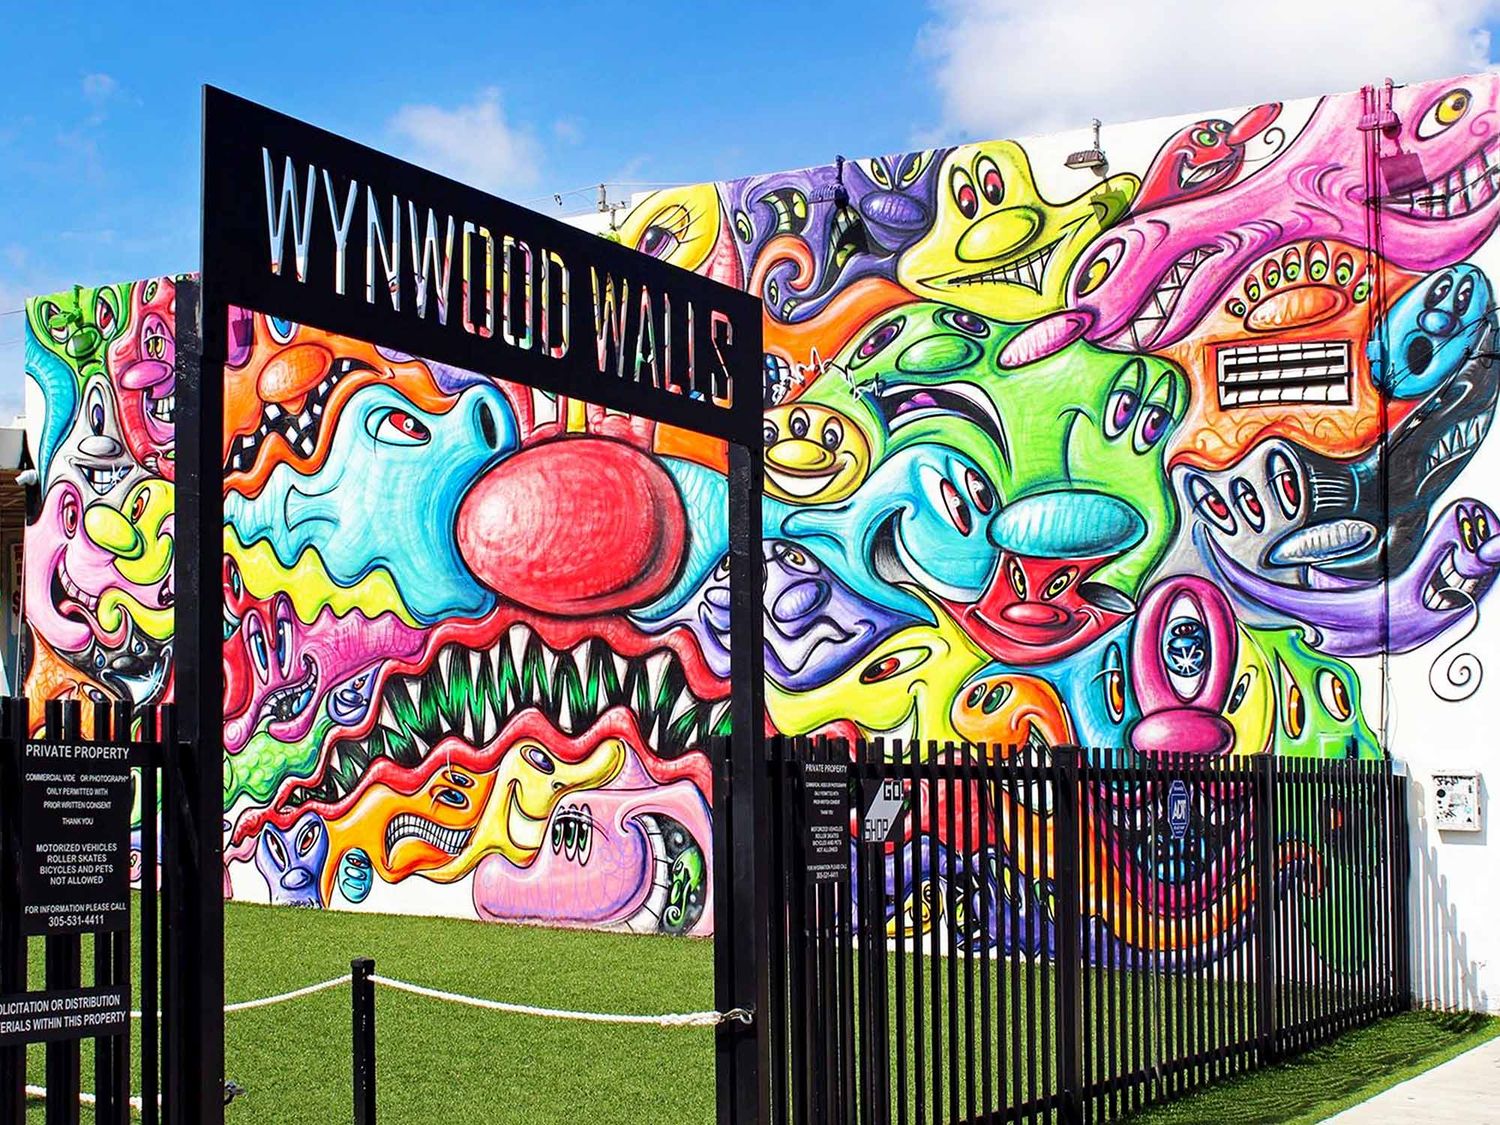 Taking the form of an open-air museum with dozens of murals, Wynwood Walls is a unique experience to discover in Miami and much more in the surrounding neighborhood (©L. Yakiwchuk / @Kenny Scharf).